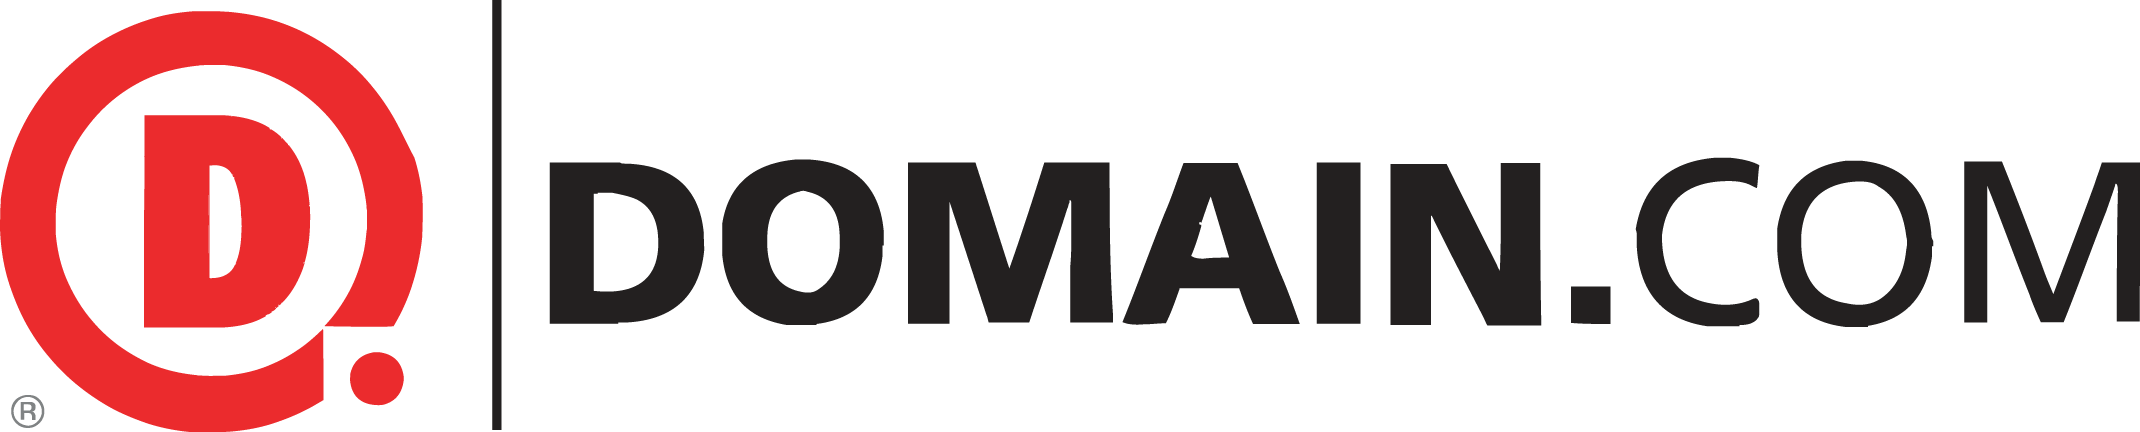 A red logo and written text of "Domain.com"